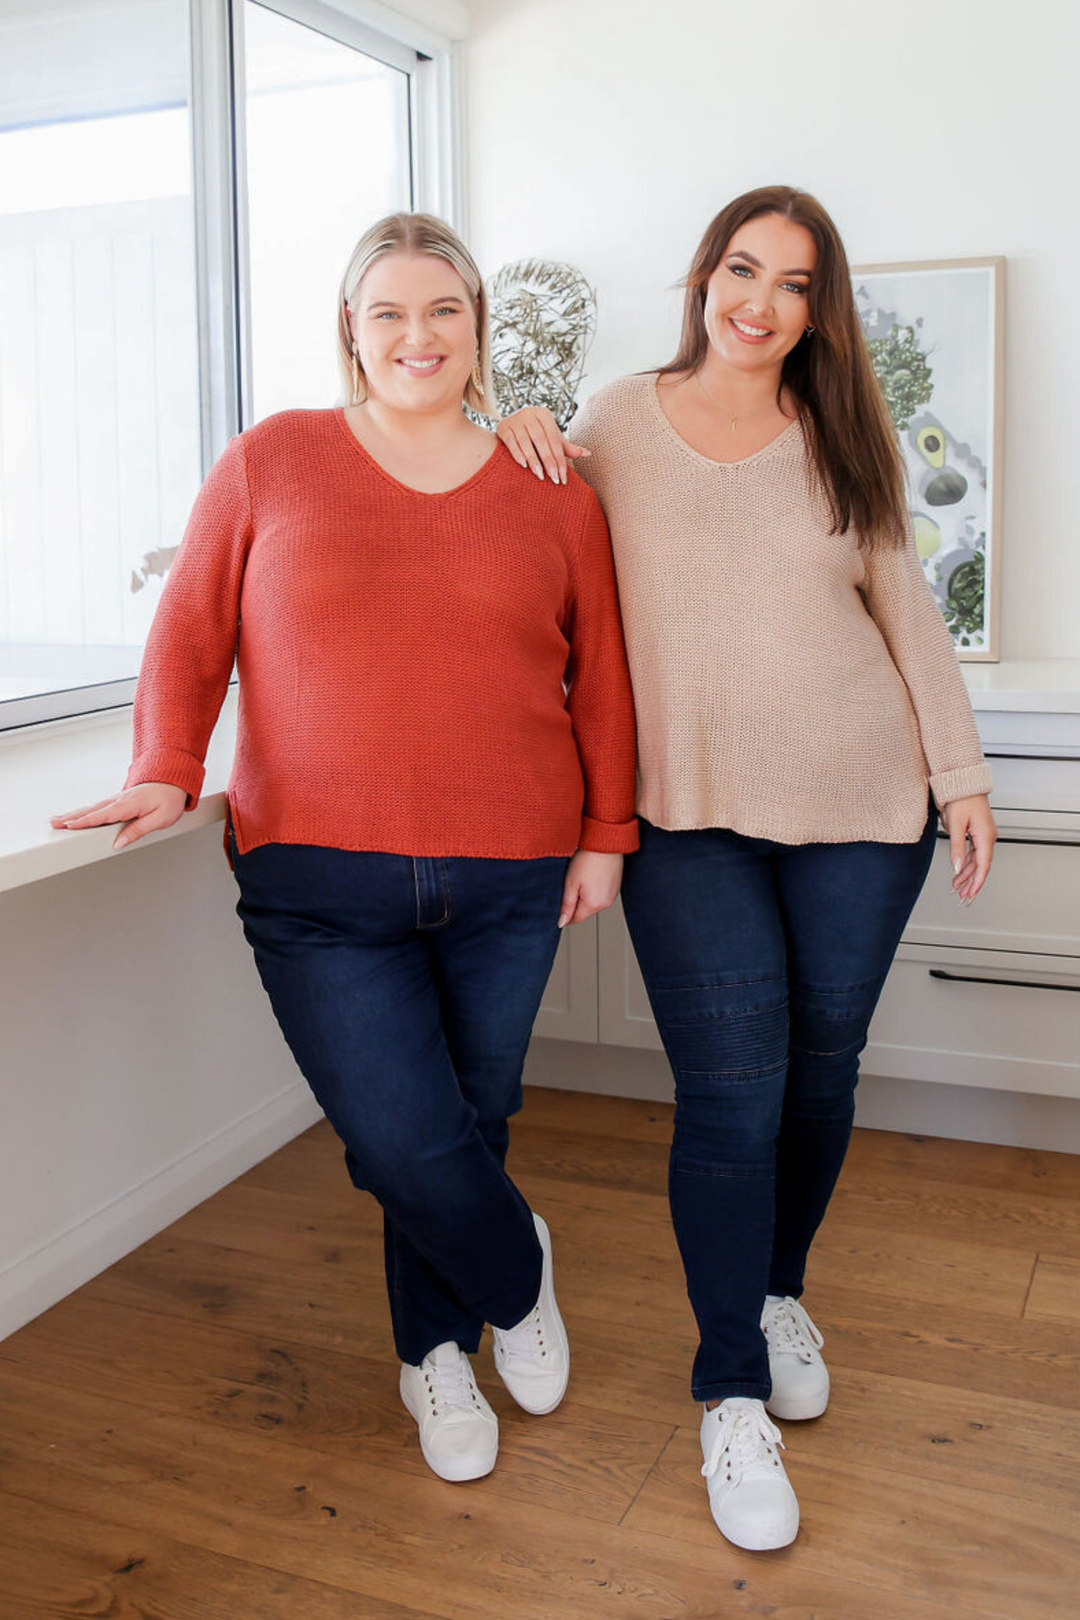 Ladies Plus Size Jeans - Dark Denim Jeans - Elasticised Waist Band - Finctional Front and Back Pockets - Carter Curve Jeans Front Full Length View Paired with Millie Rust Knit Size 22 - Daisy's Closet